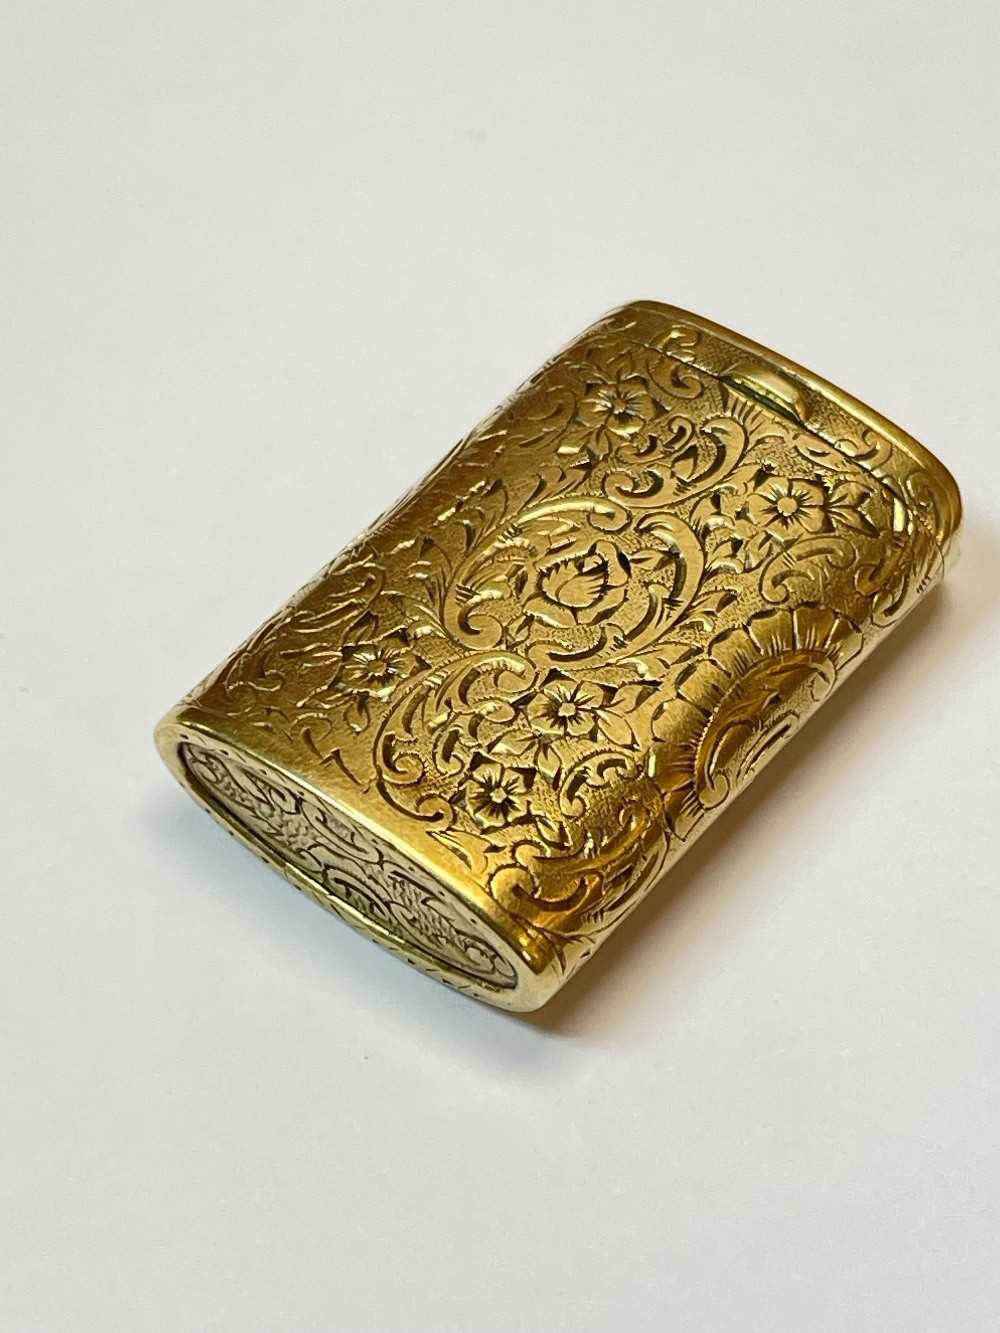 14K GOLD VESTA CASE, overall scroll engraved, of rectangular curved shape with striking end, - Image 10 of 10